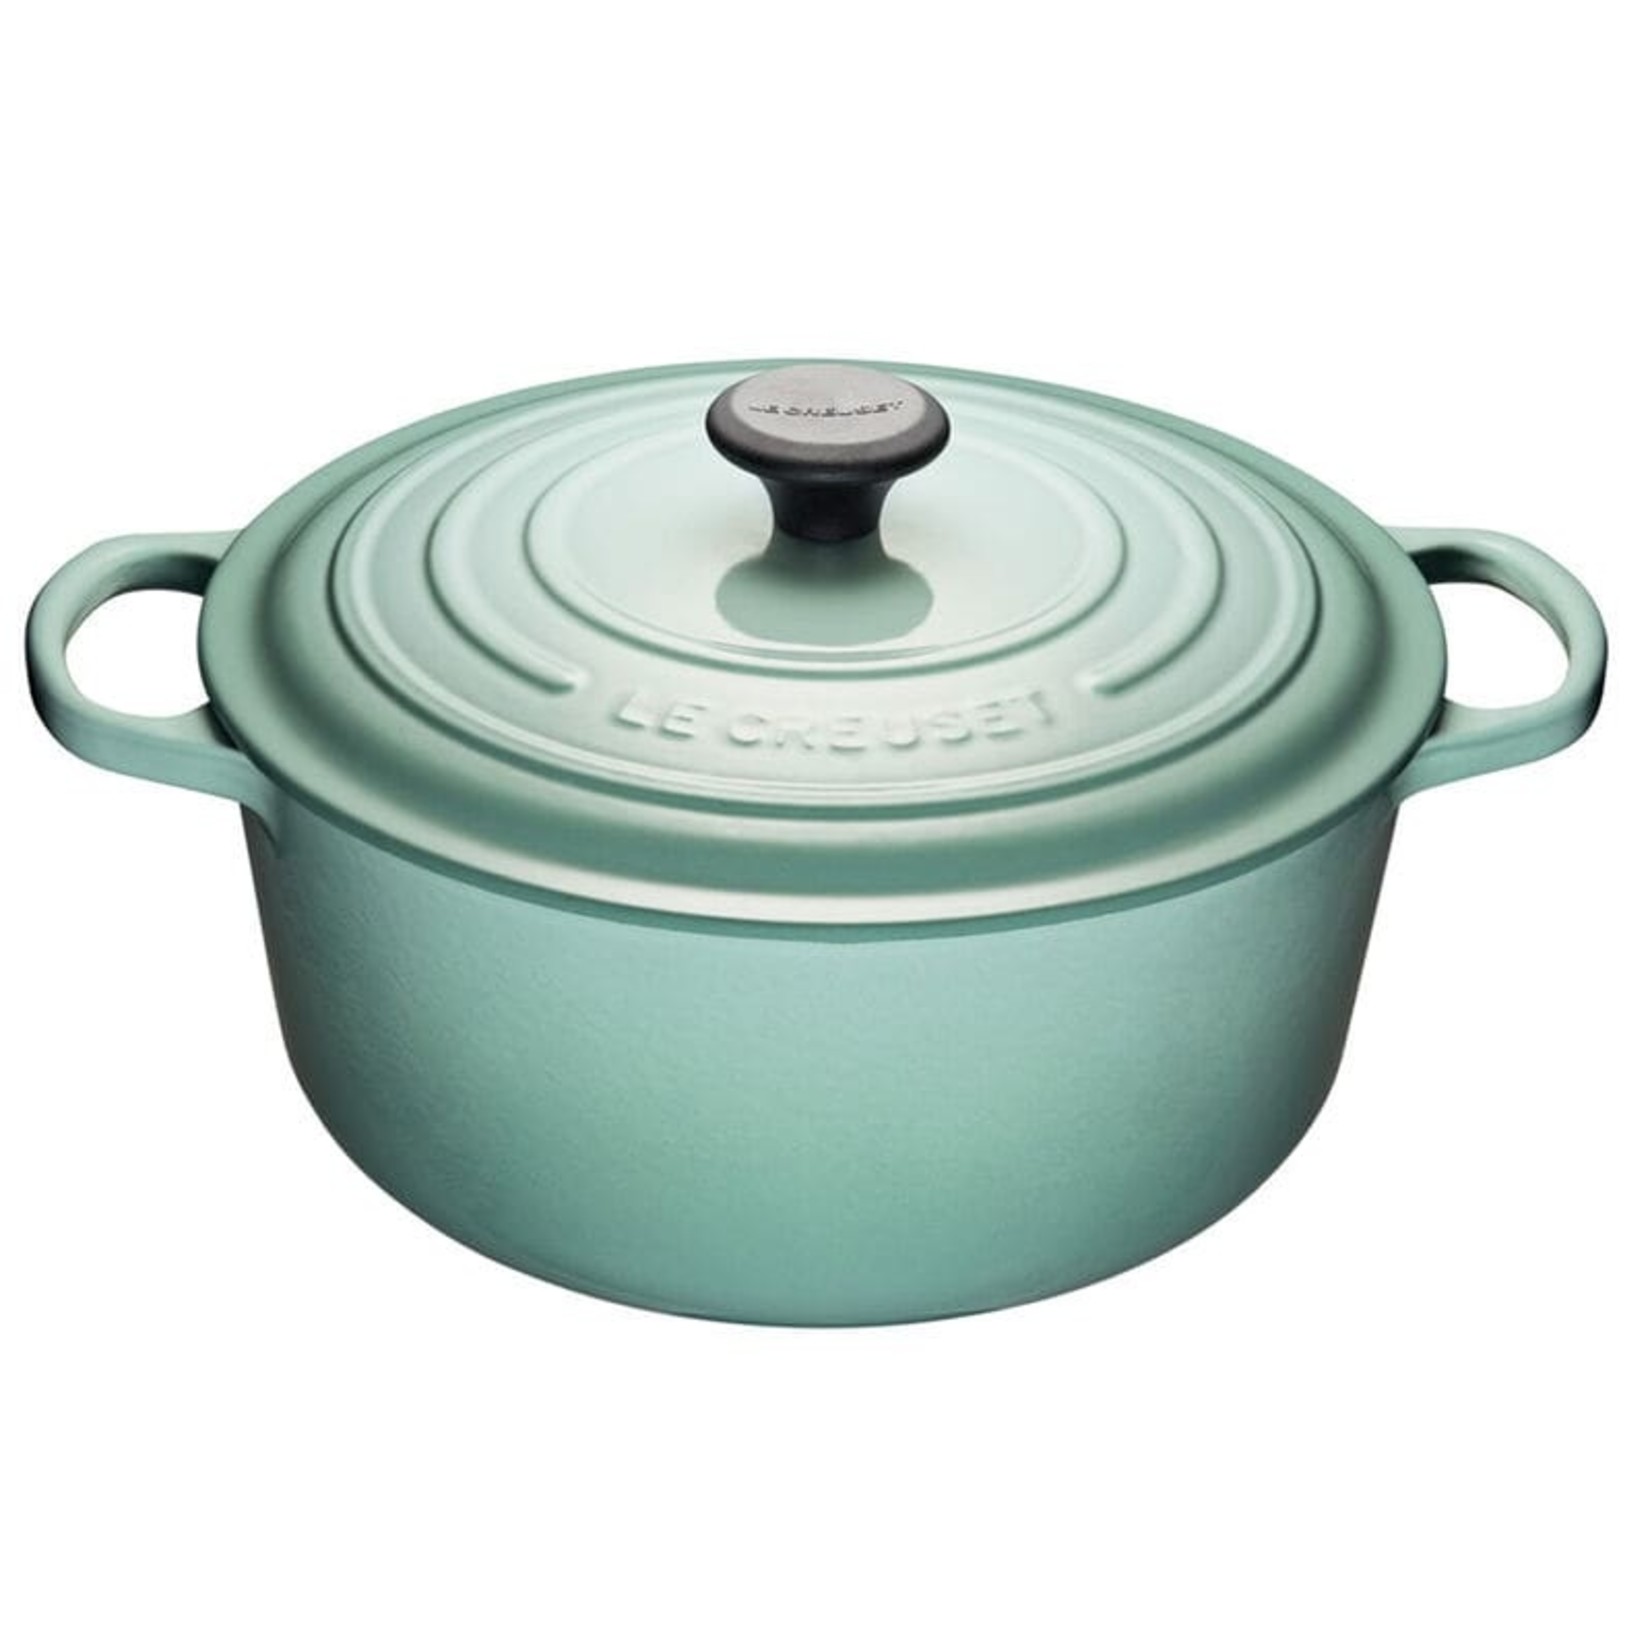 LE CREUSET LE CREUSET Round French Oven 6.7L